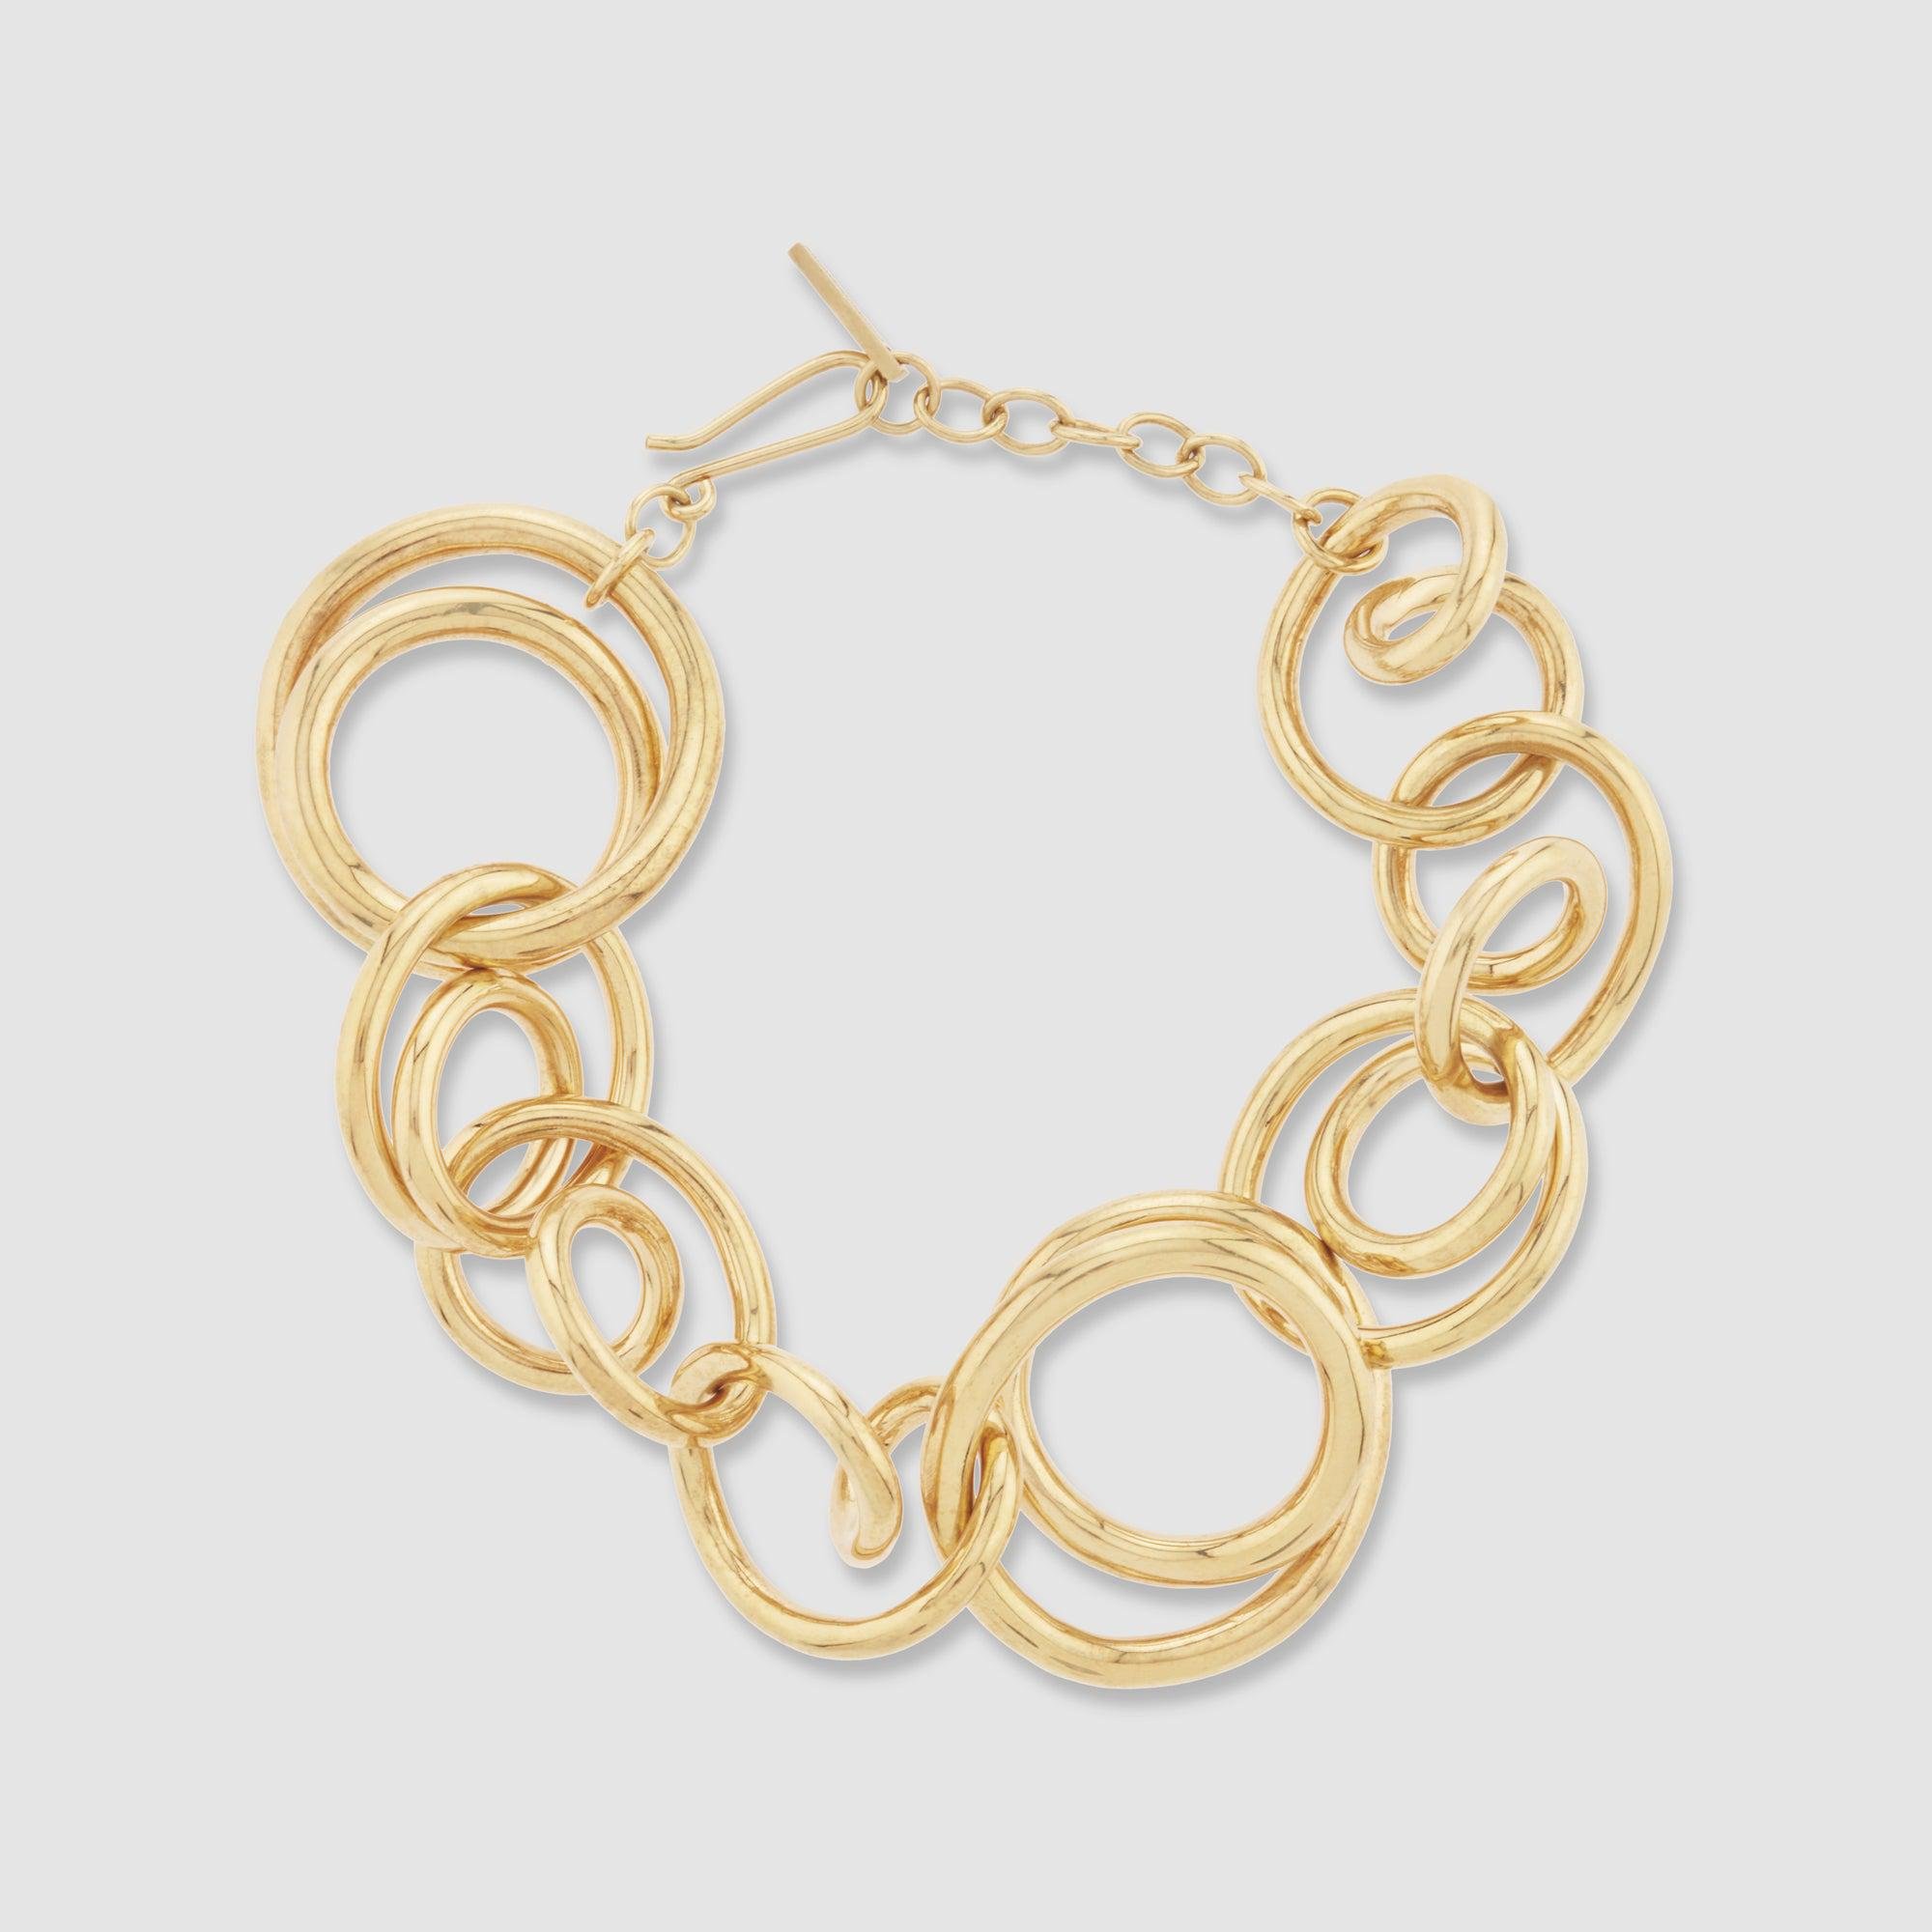 Completedworks - Yellow Gold Chain Bracelet by COMPLETEDWORKS